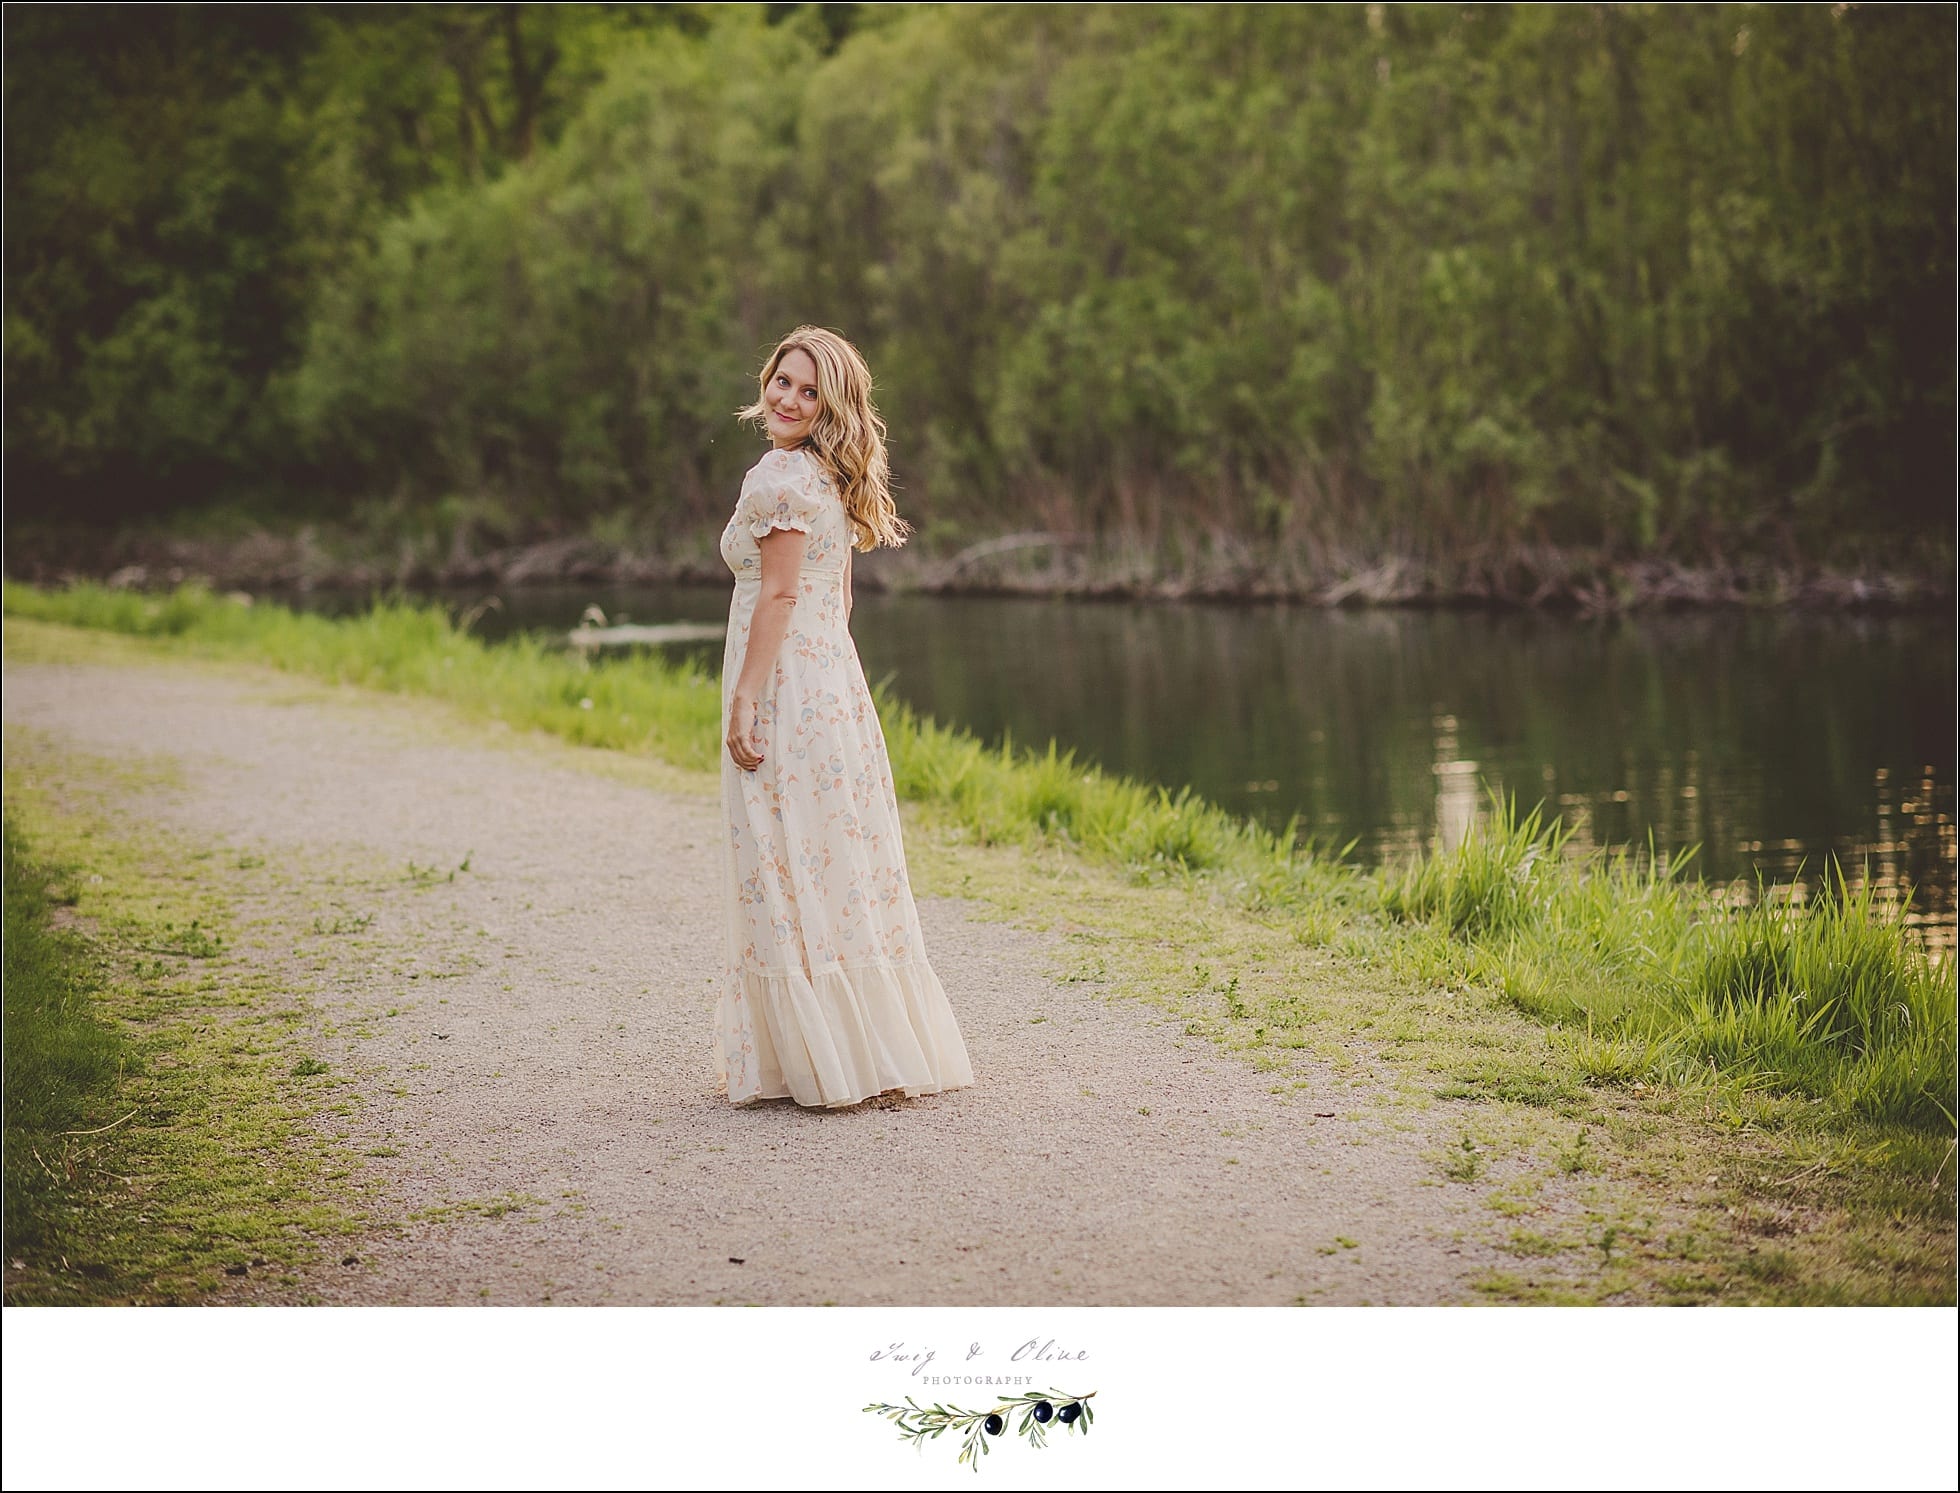 angelic, summer dresses, flowing white dress, perfect sessions, stylized shoots, happy, posed, TOP